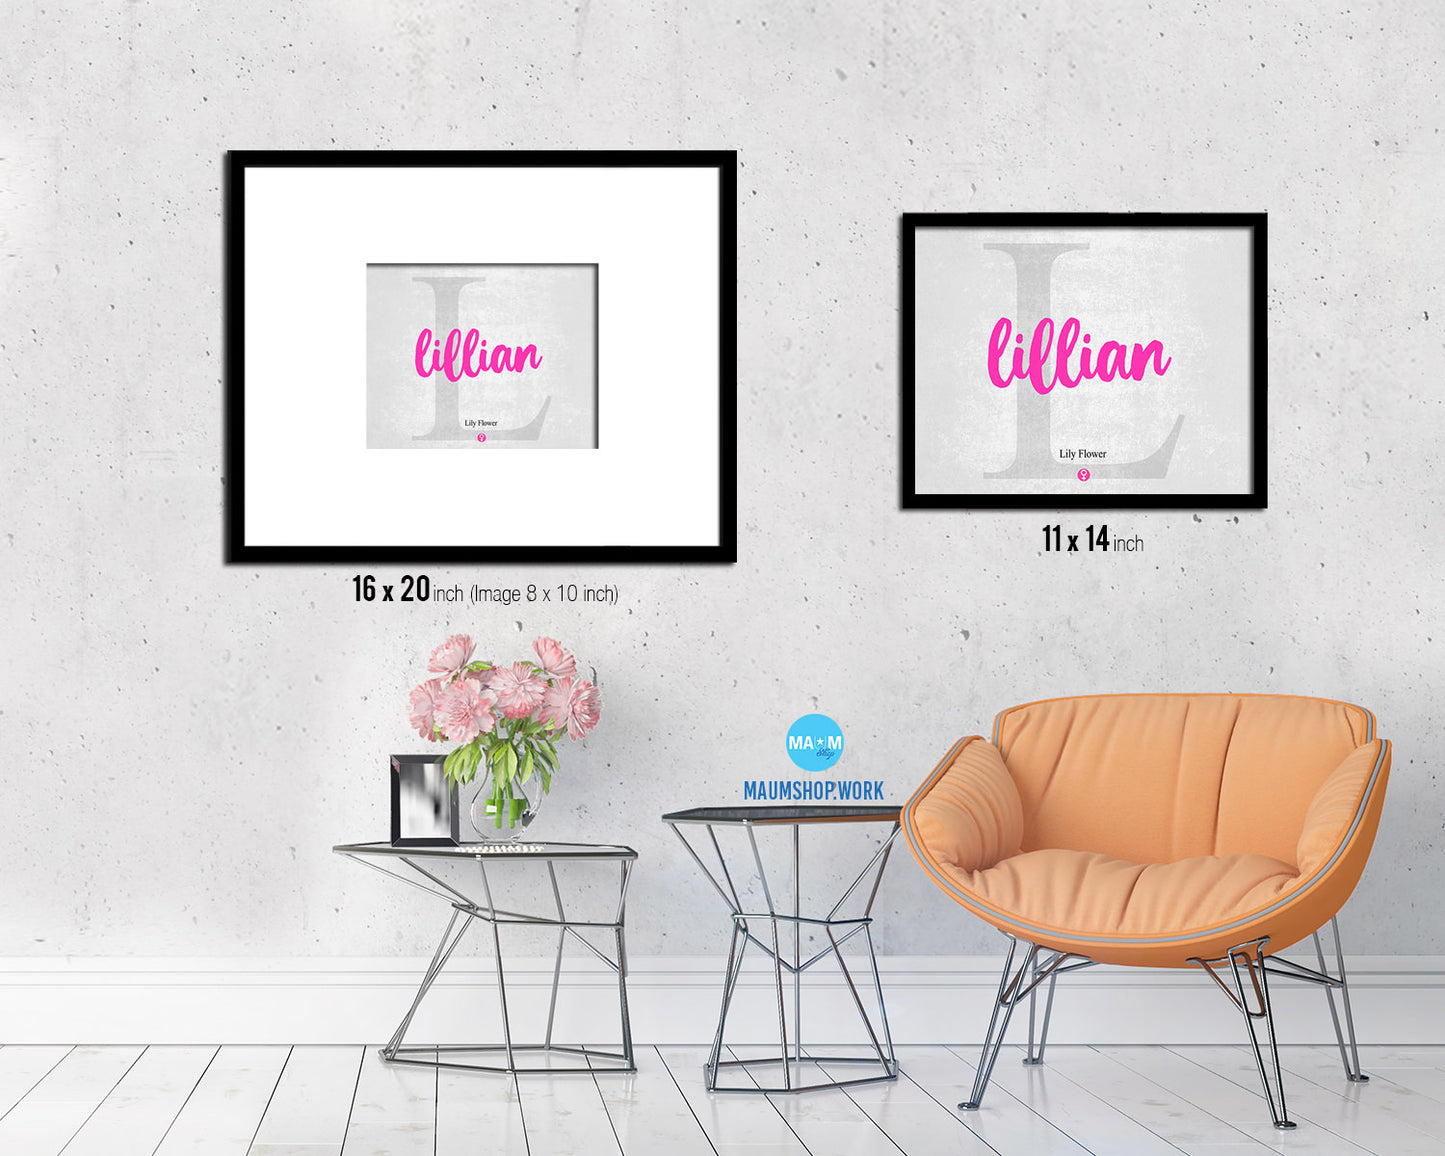 Lillian Personalized Biblical Name Plate Art Framed Print Kids Baby Room Wall Decor Gifts